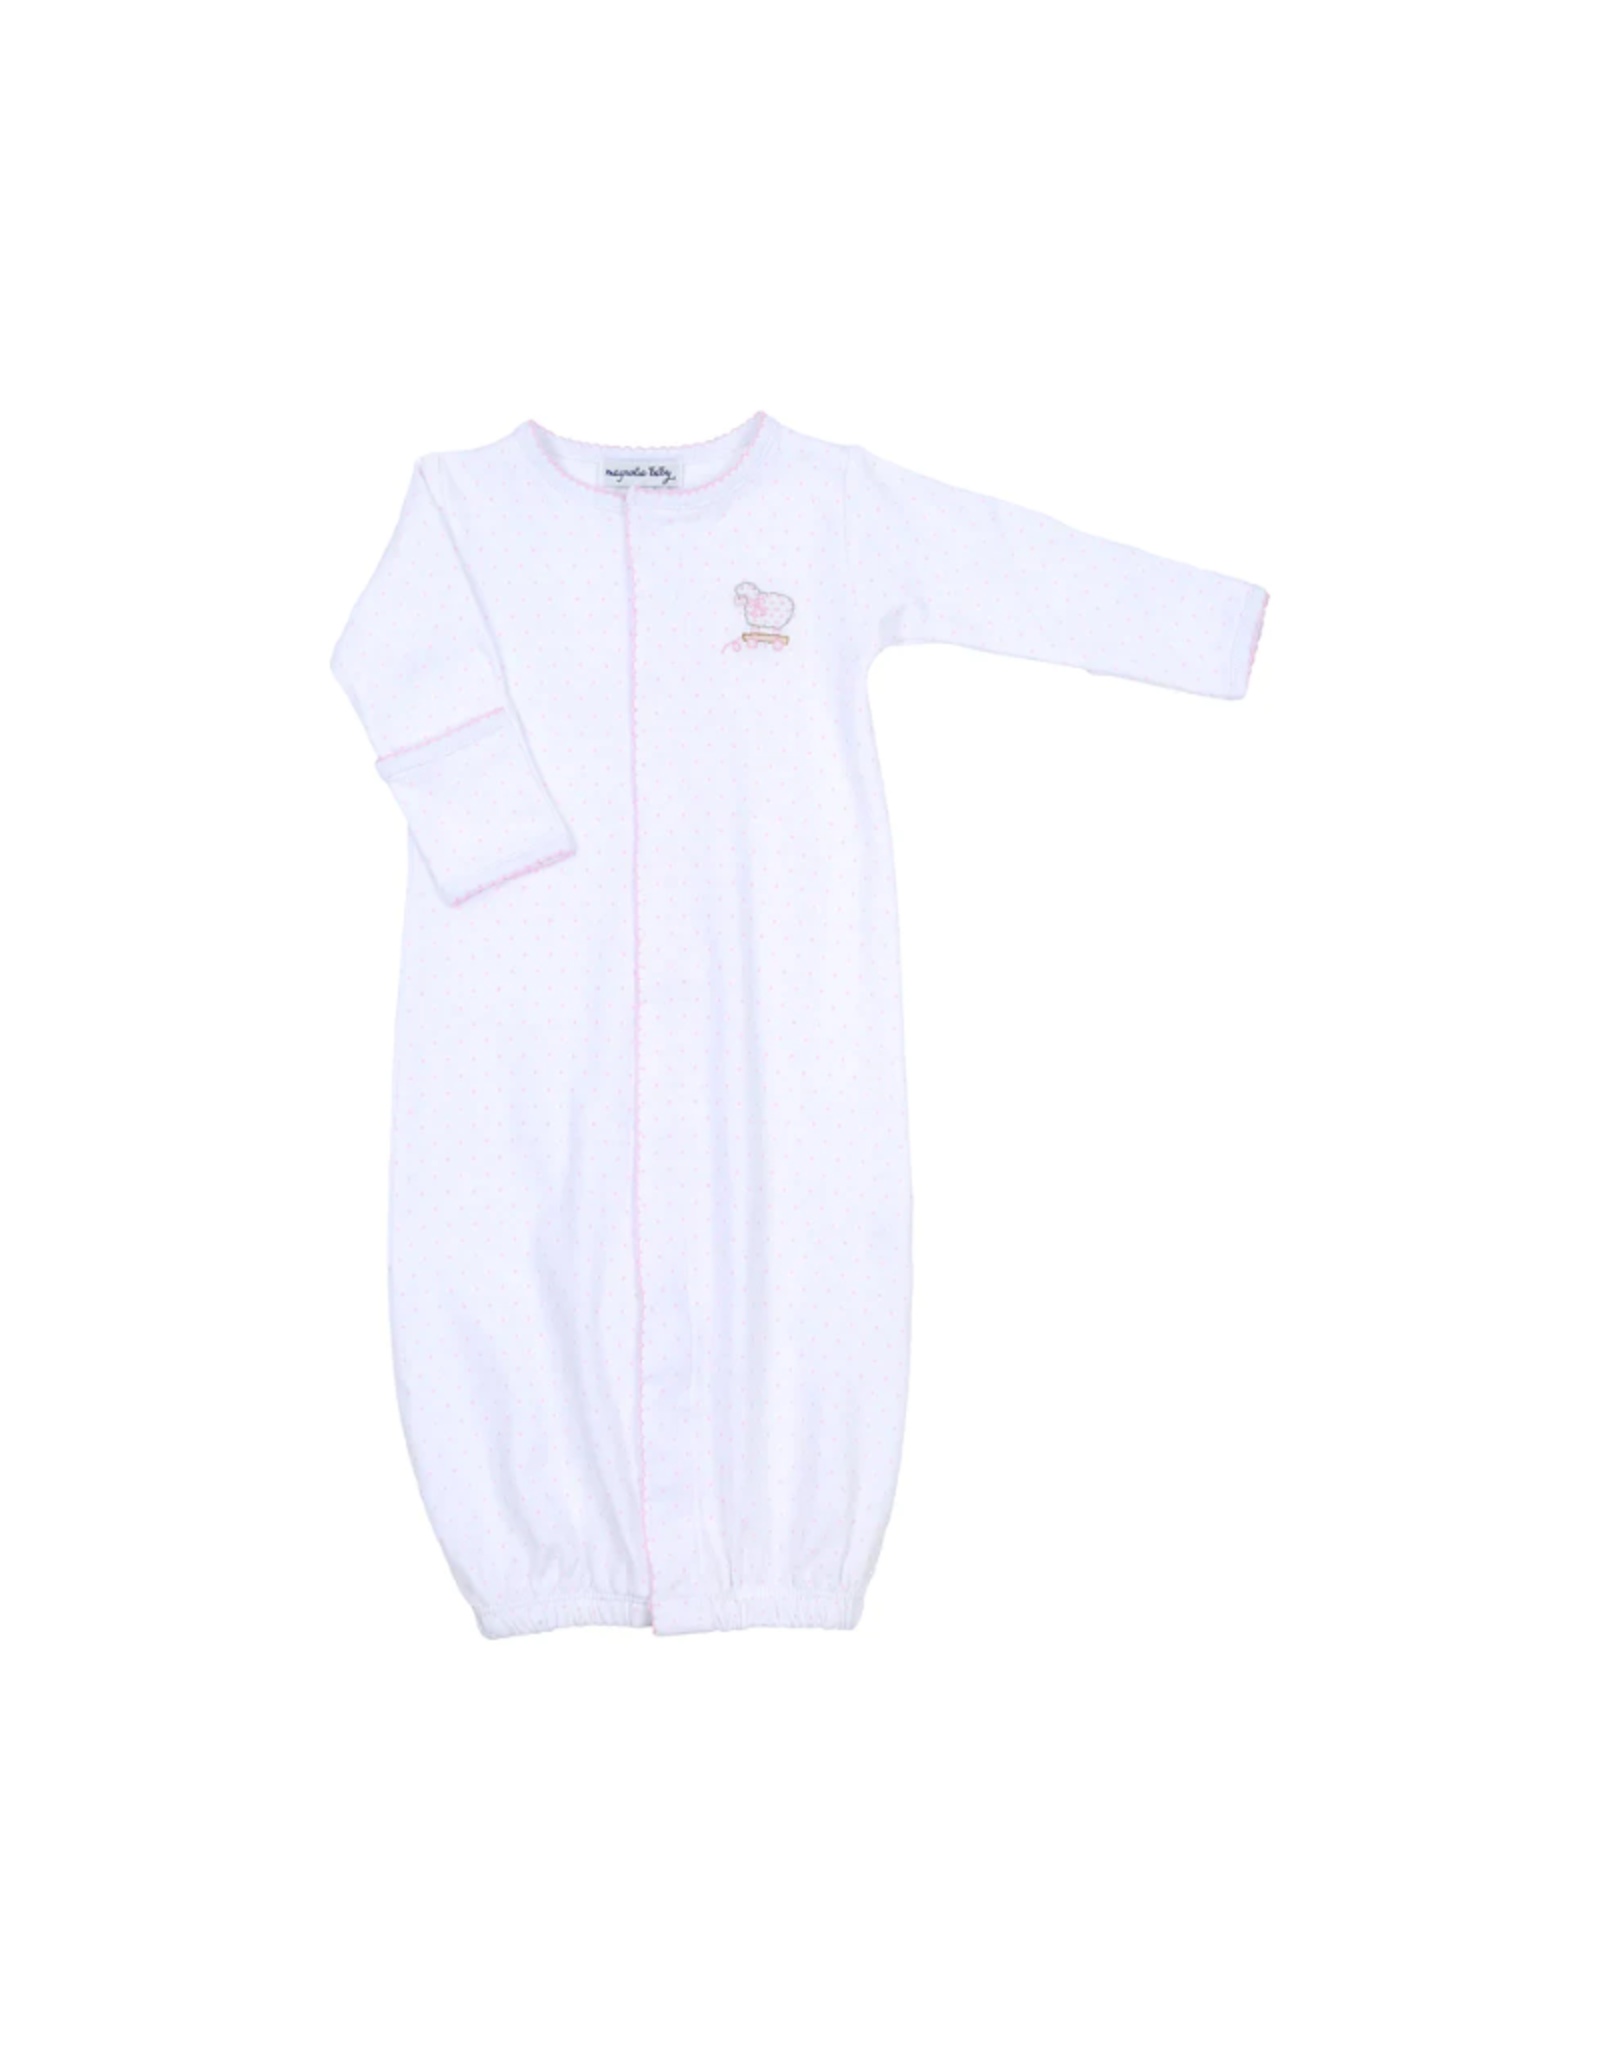 Magnolia Baby Darling Lambs Embroidered Converter Pink